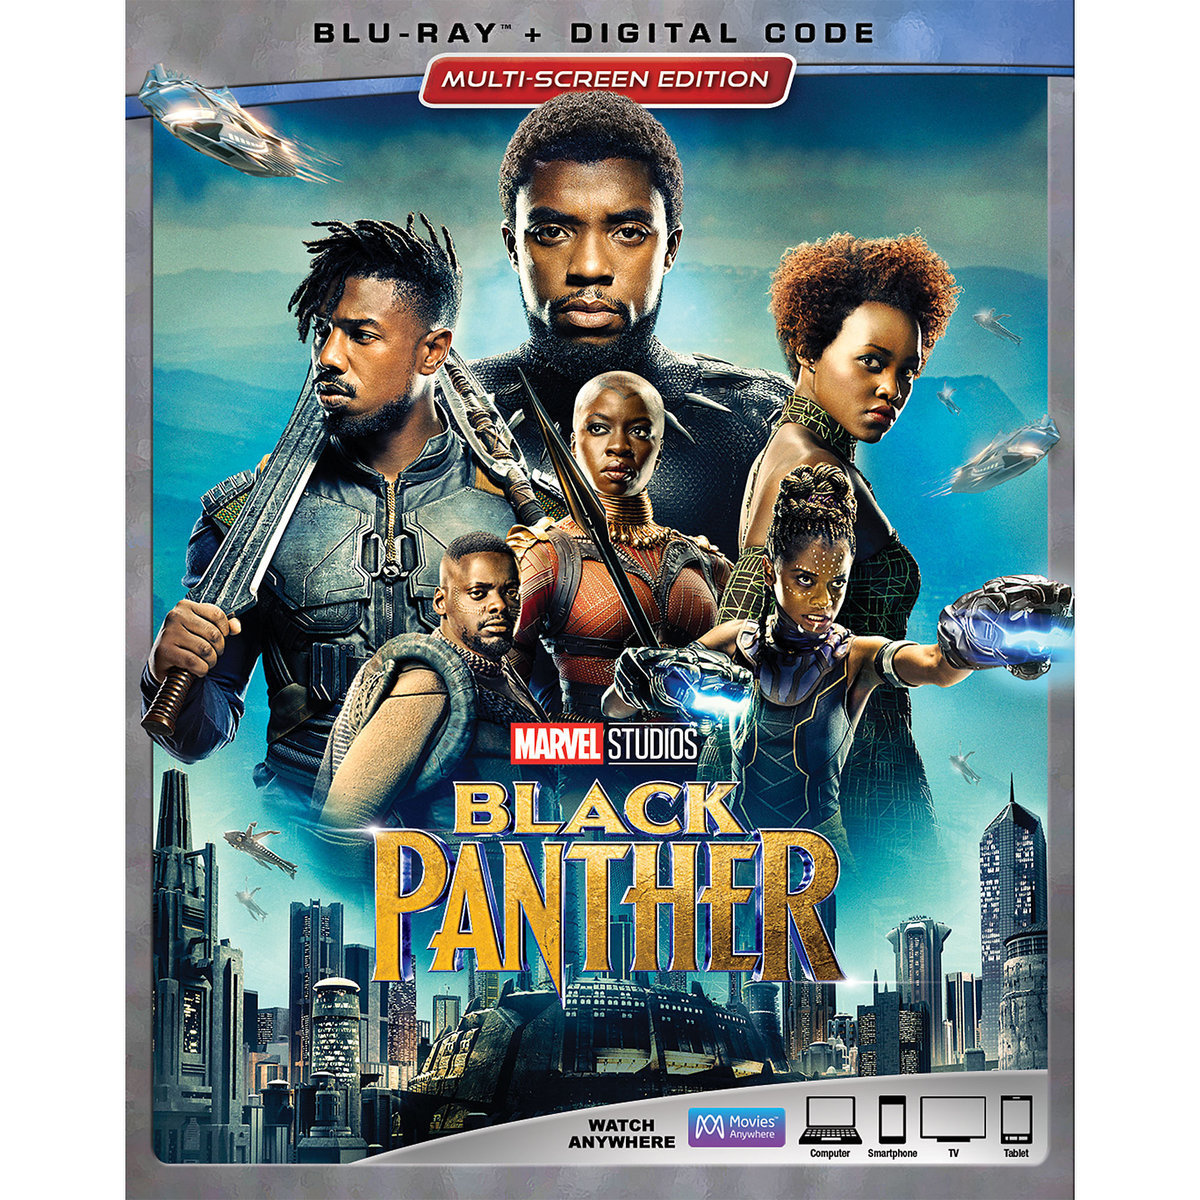 Black Panther DVD and Blu-ray combo